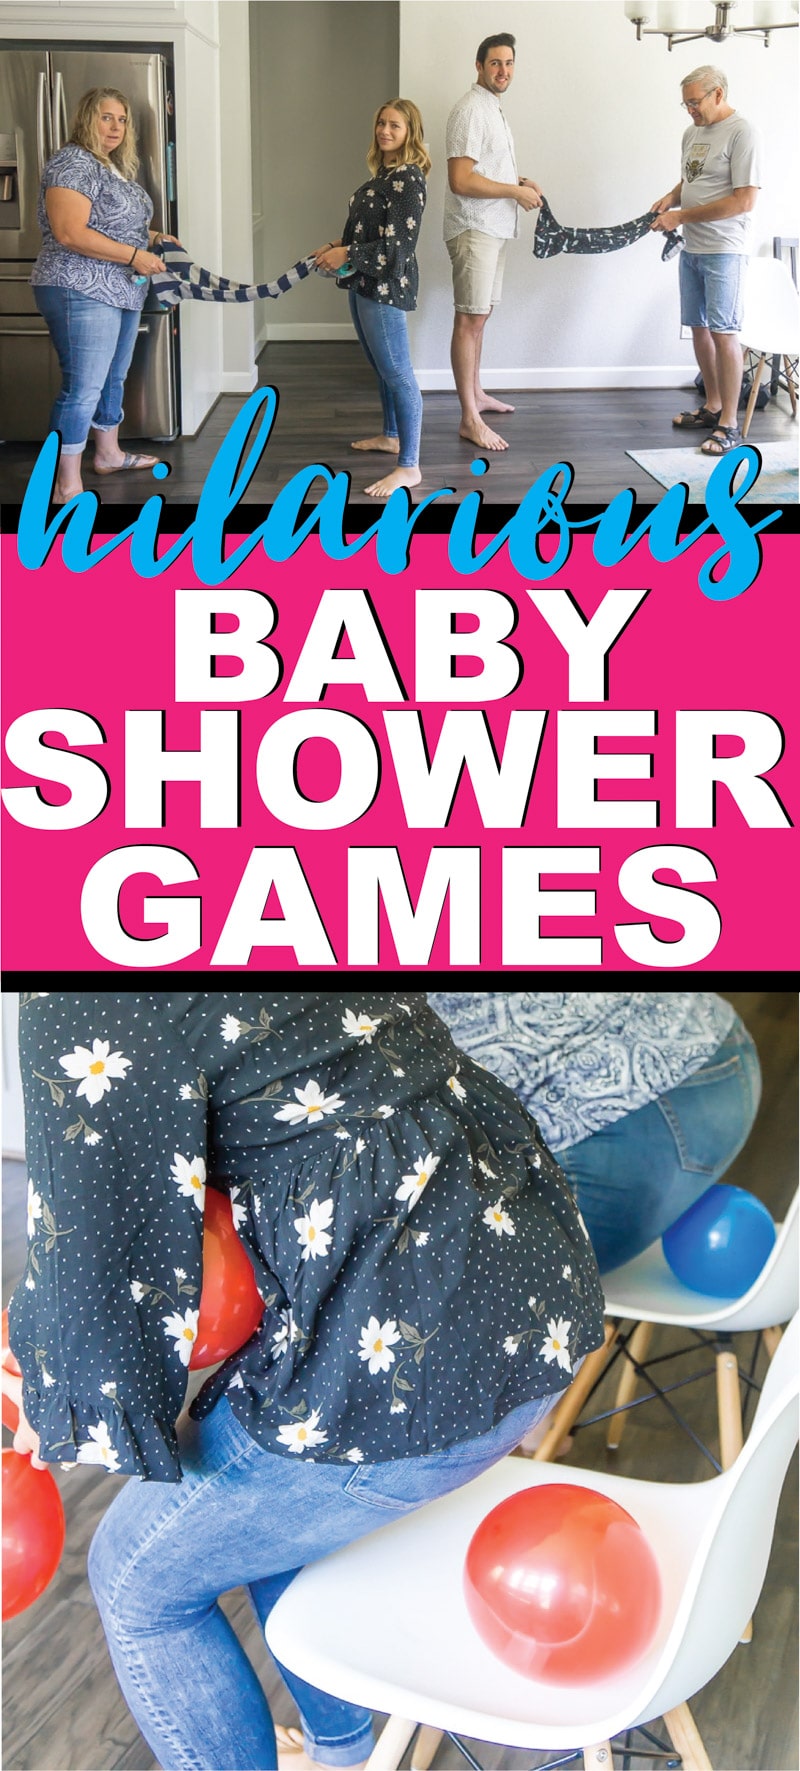 baby-shower-game-what-did-mommy-and-daddy-say-train-shower-game